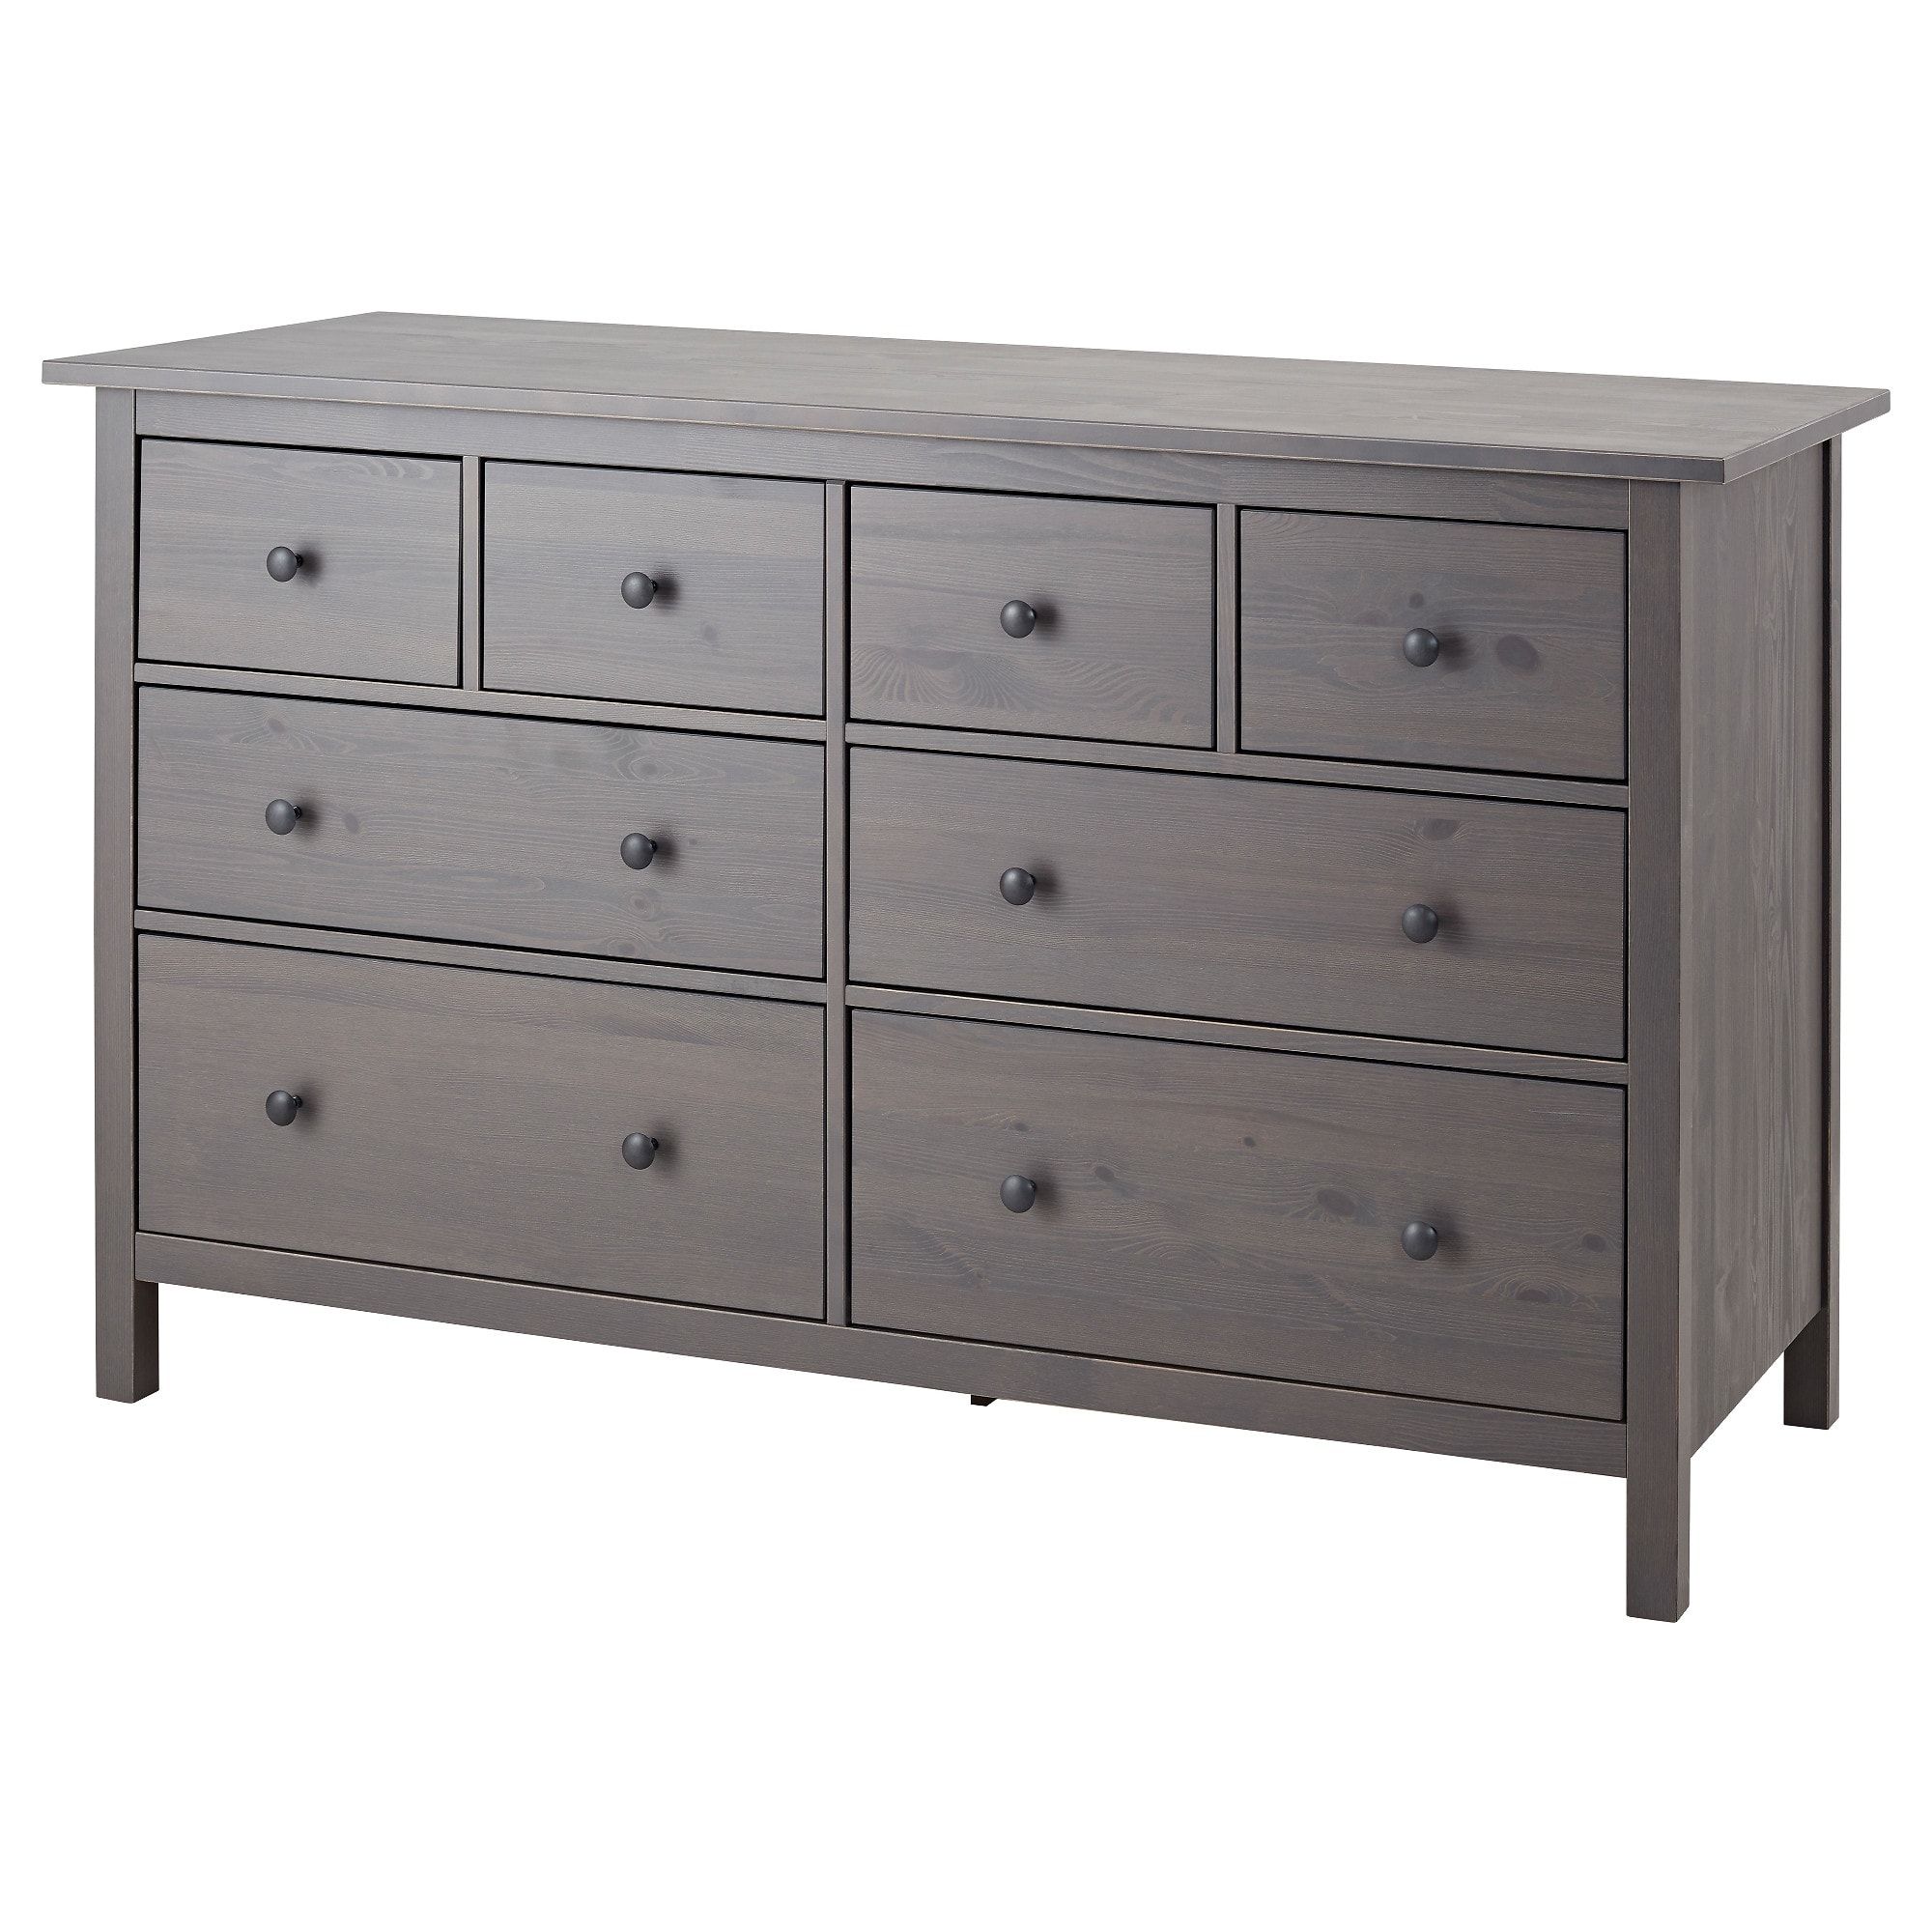 Hemnes 8 Drawer Dresser – Dark Gray Stained, 63x37 3/8 " – Ikea With Oil Pale Finish 4 Door Sideboards (View 13 of 30)